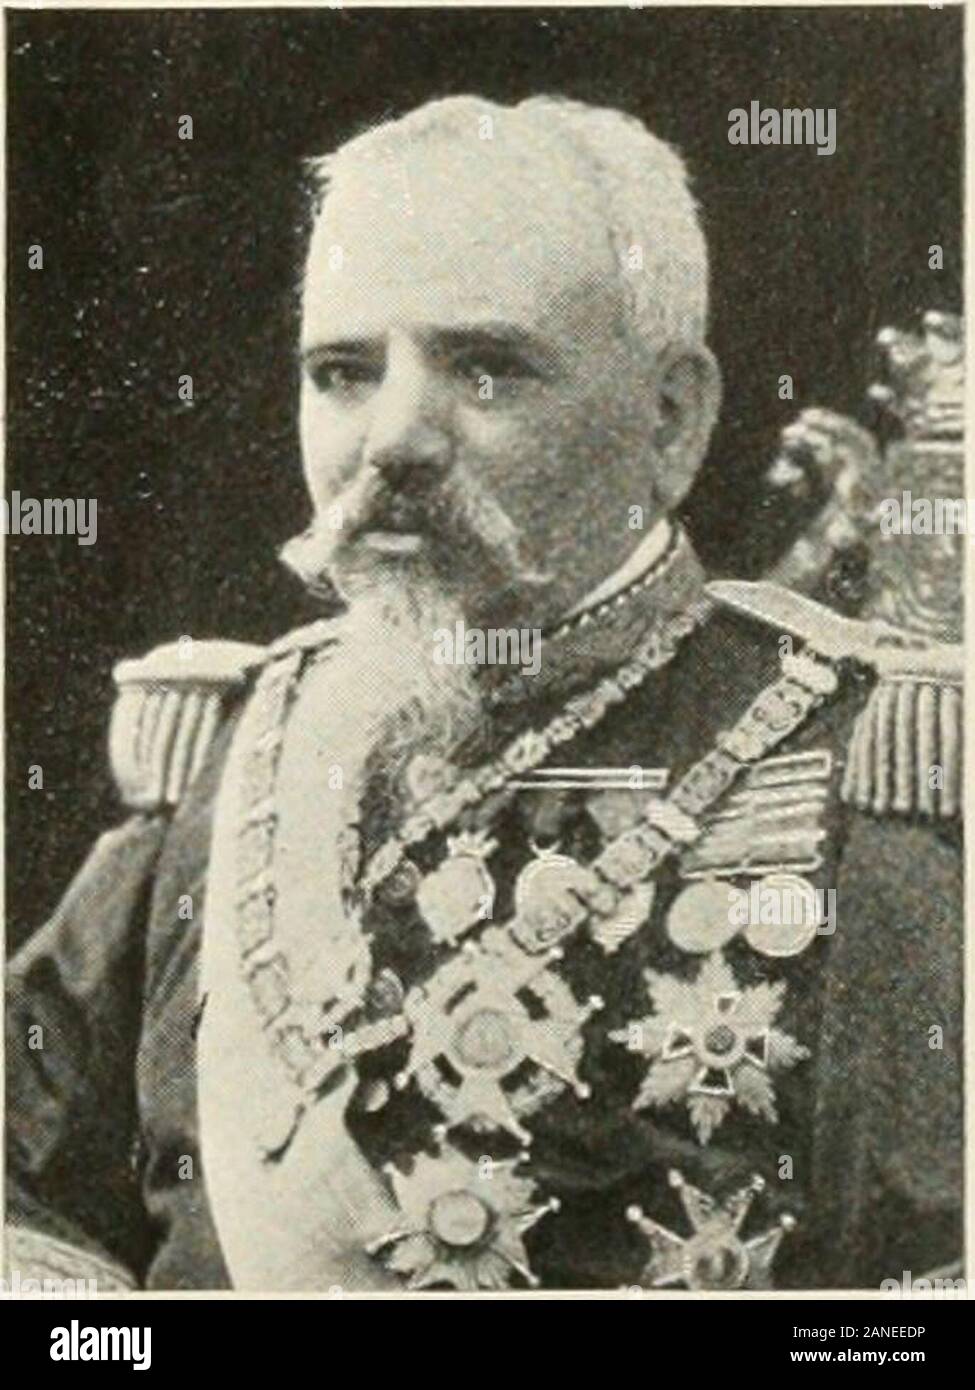 The war with Spain; a complete history of the war of 1898 between the United States and Spain . Gen. Linares Gen. Ramon Blanco ? - w ^^ it •* s - H lit if- Ja Hyk/mm/fli 1. Gen. Valeriano Weyler Gen. Martinez de Campos SPANISH COMMANDERS THE WAR WITH SPAIN. 81 have no autonomy. Independence or death was theirsole demand. Gomez issued a warning that any personcoming to his camps with offers of autonomy should beshot as a spy ; and this severe order was carried out inthe case of Lieutenant-Colonel Ruiz, who sought thecamp of General Aranguren and persisted in offeringautonomy to the men after be Stock Photo